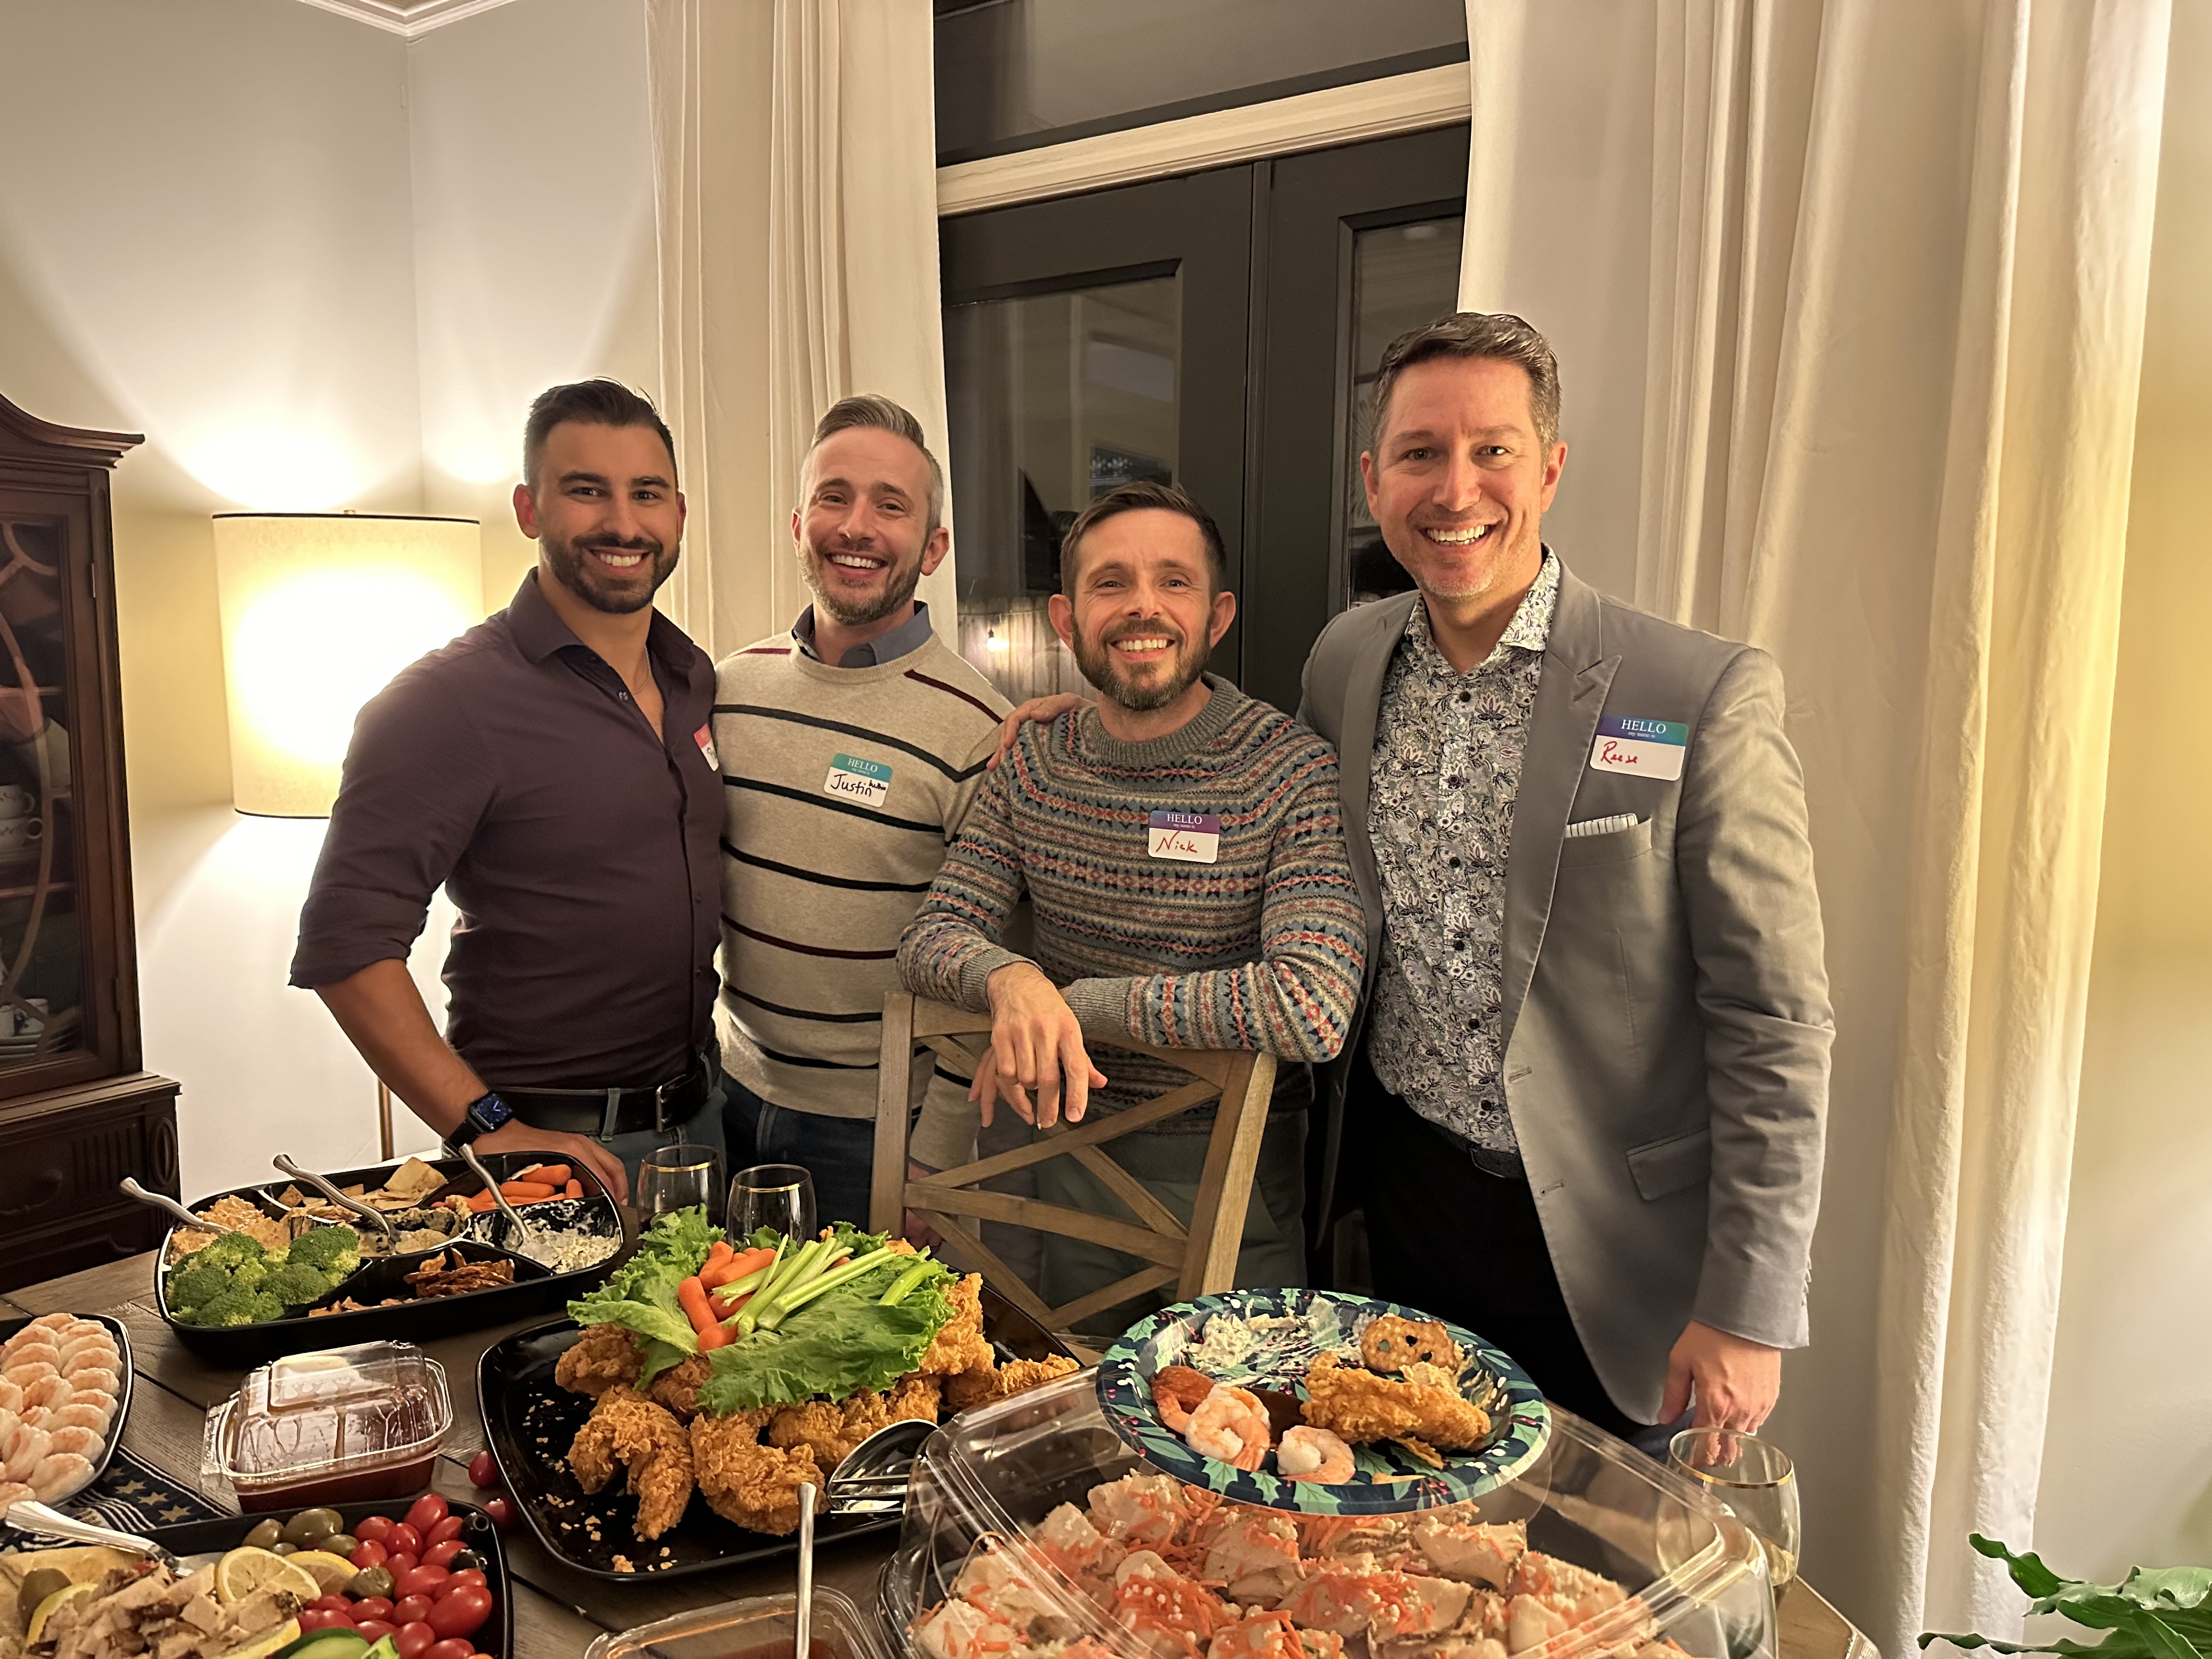 Four men smile for a photo at a dinner party.